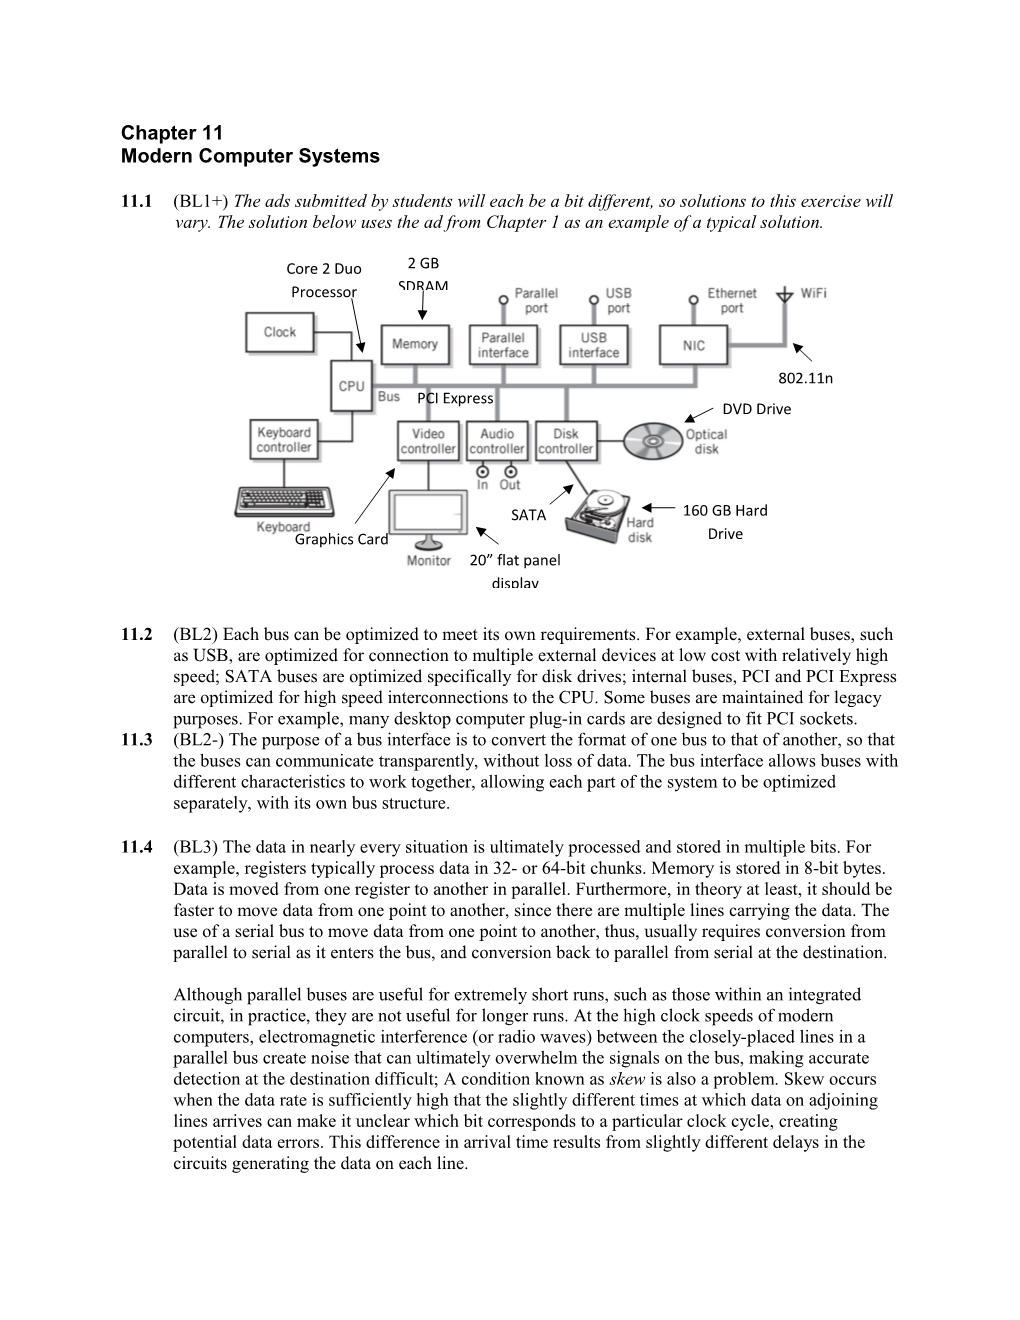 Chapter 11 Modern Computer Systems